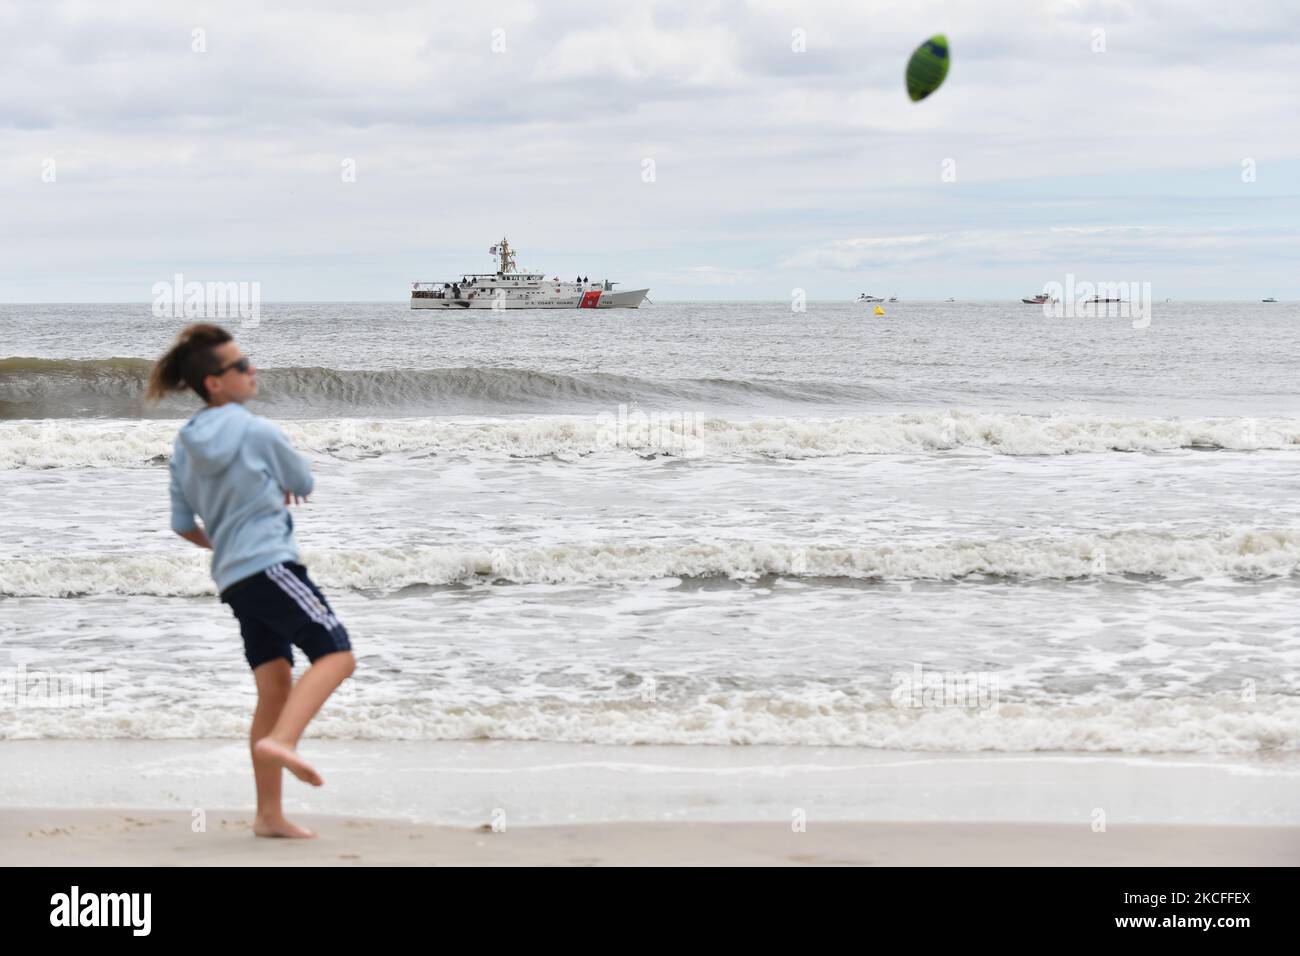 After the entire weekend of shows were canceled due to heavy storms, an improvised Memorial Day airshow was held at New York's Jones Beach, featuring World War 2 aircraft from the American Airpower Museum and the U.S. Air Force Thunderbirds. Here, a boy plays football on the beach in front of the Coast Guard cutter Bruckenthal on 31 May 2021 in New York, US. (Photo by B.A. Van Sise/NurPhoto) Stock Photo